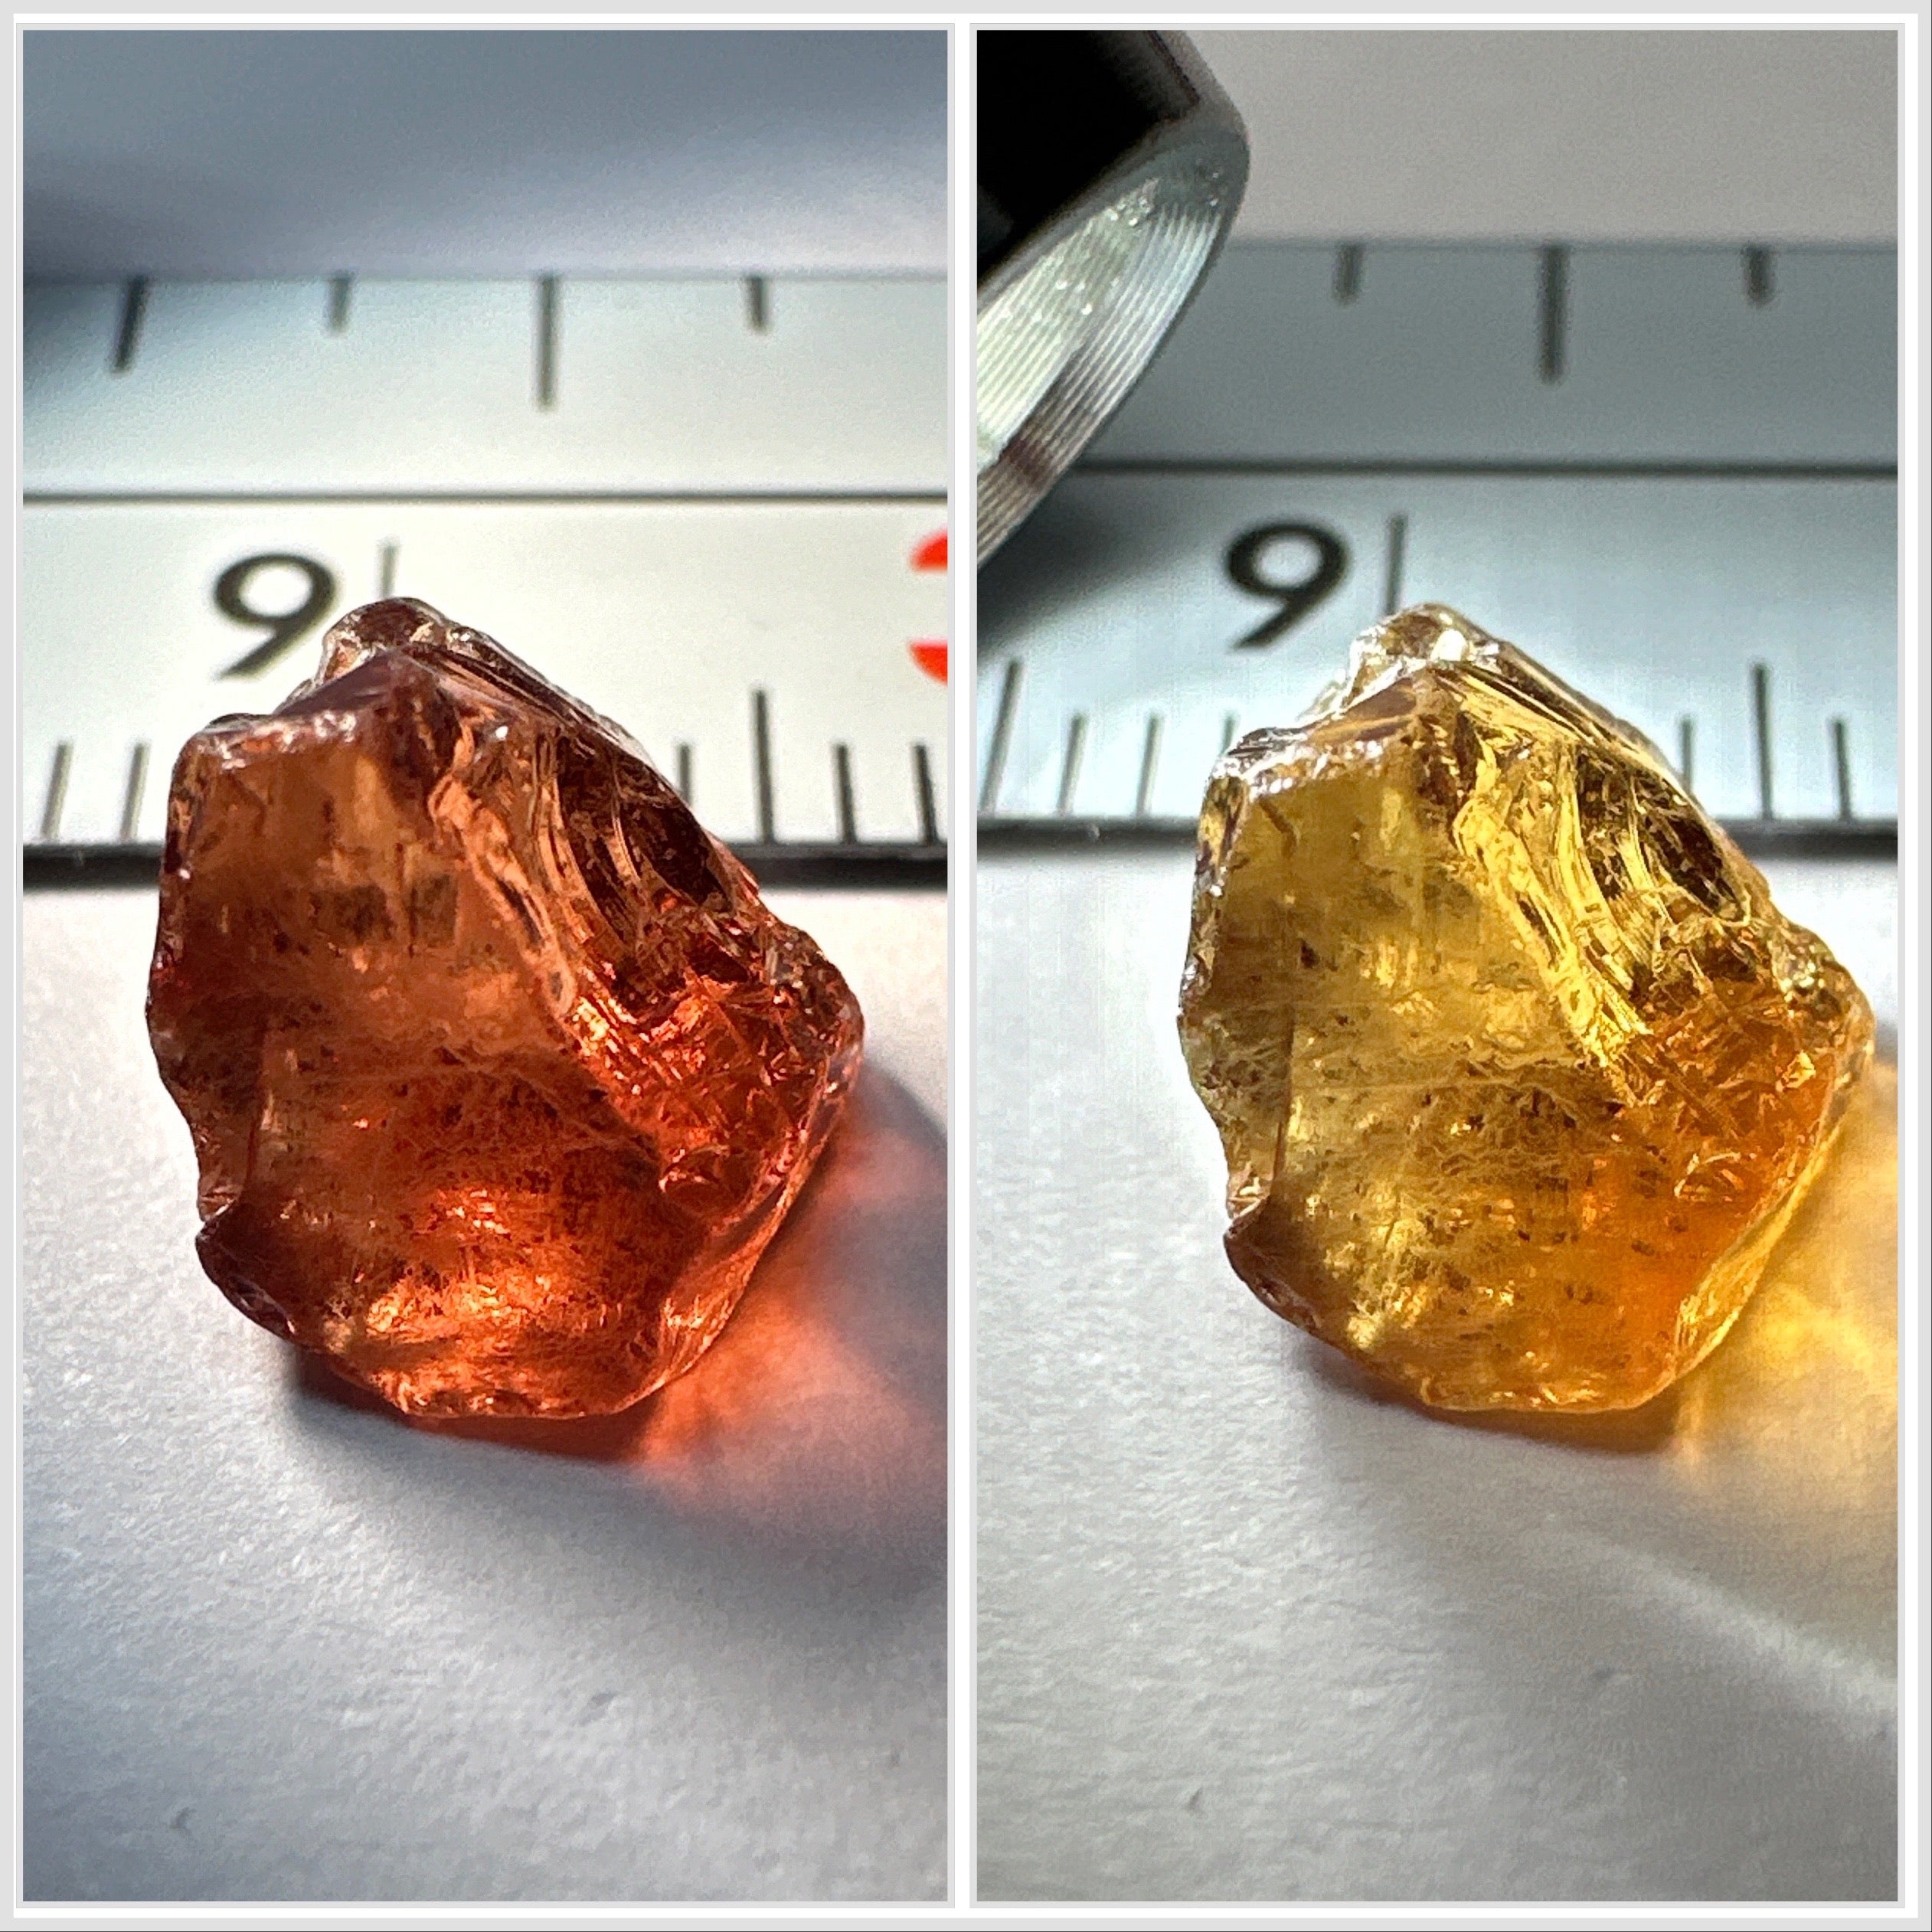 3.27ct Colour Change Garnet, Tanzania, Untreated Unheated, vvs-if with a slight inclusion on the skin on the outside